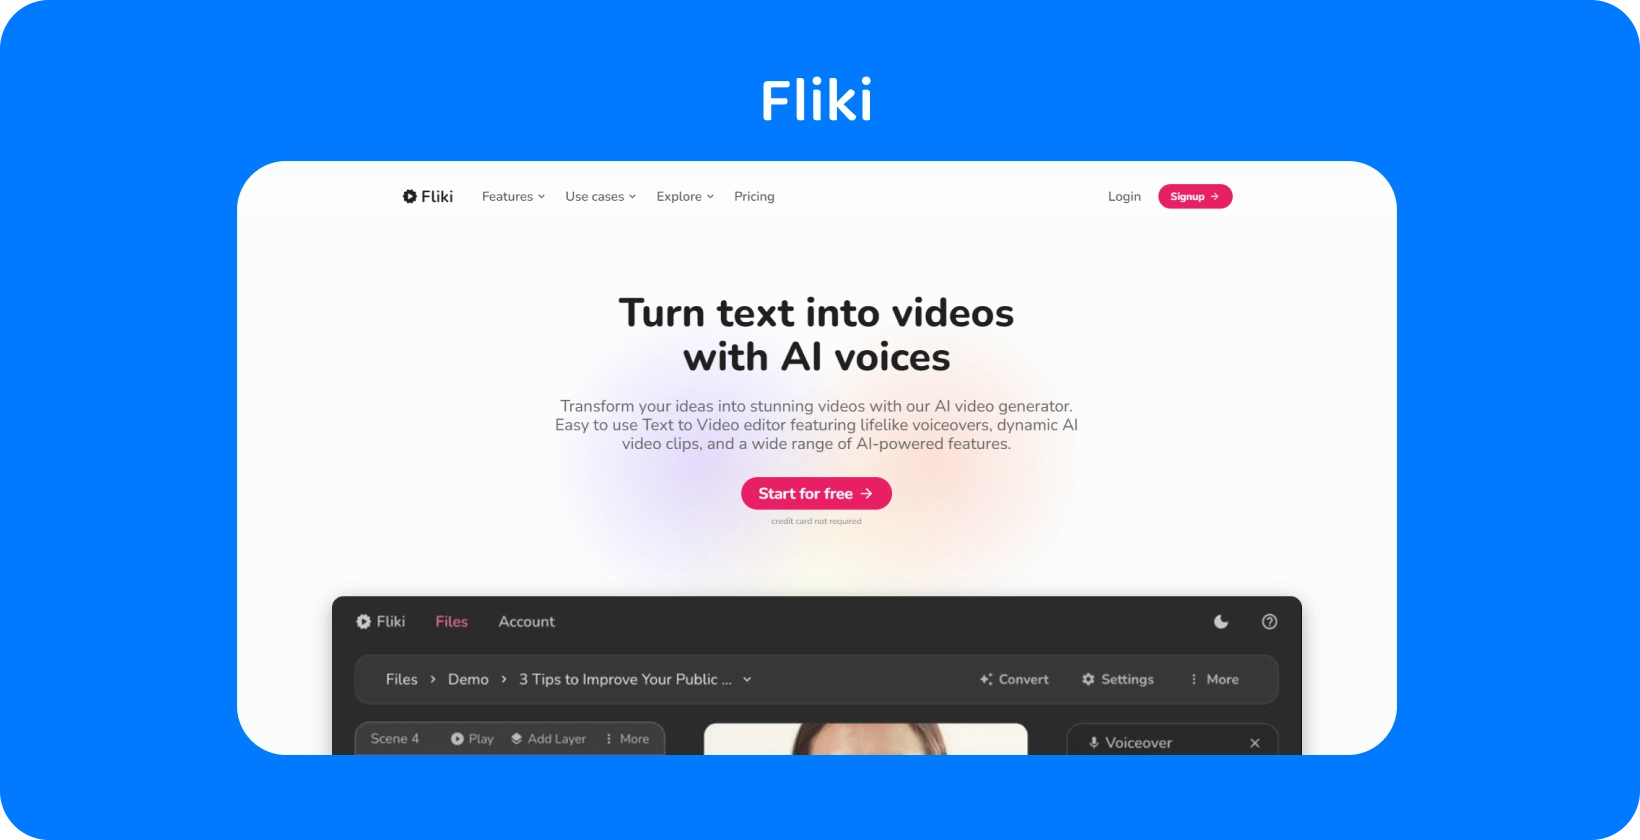 Fliki's platform page shows how to turn text into videos with AI voices, offering a text-to-video editing experience.